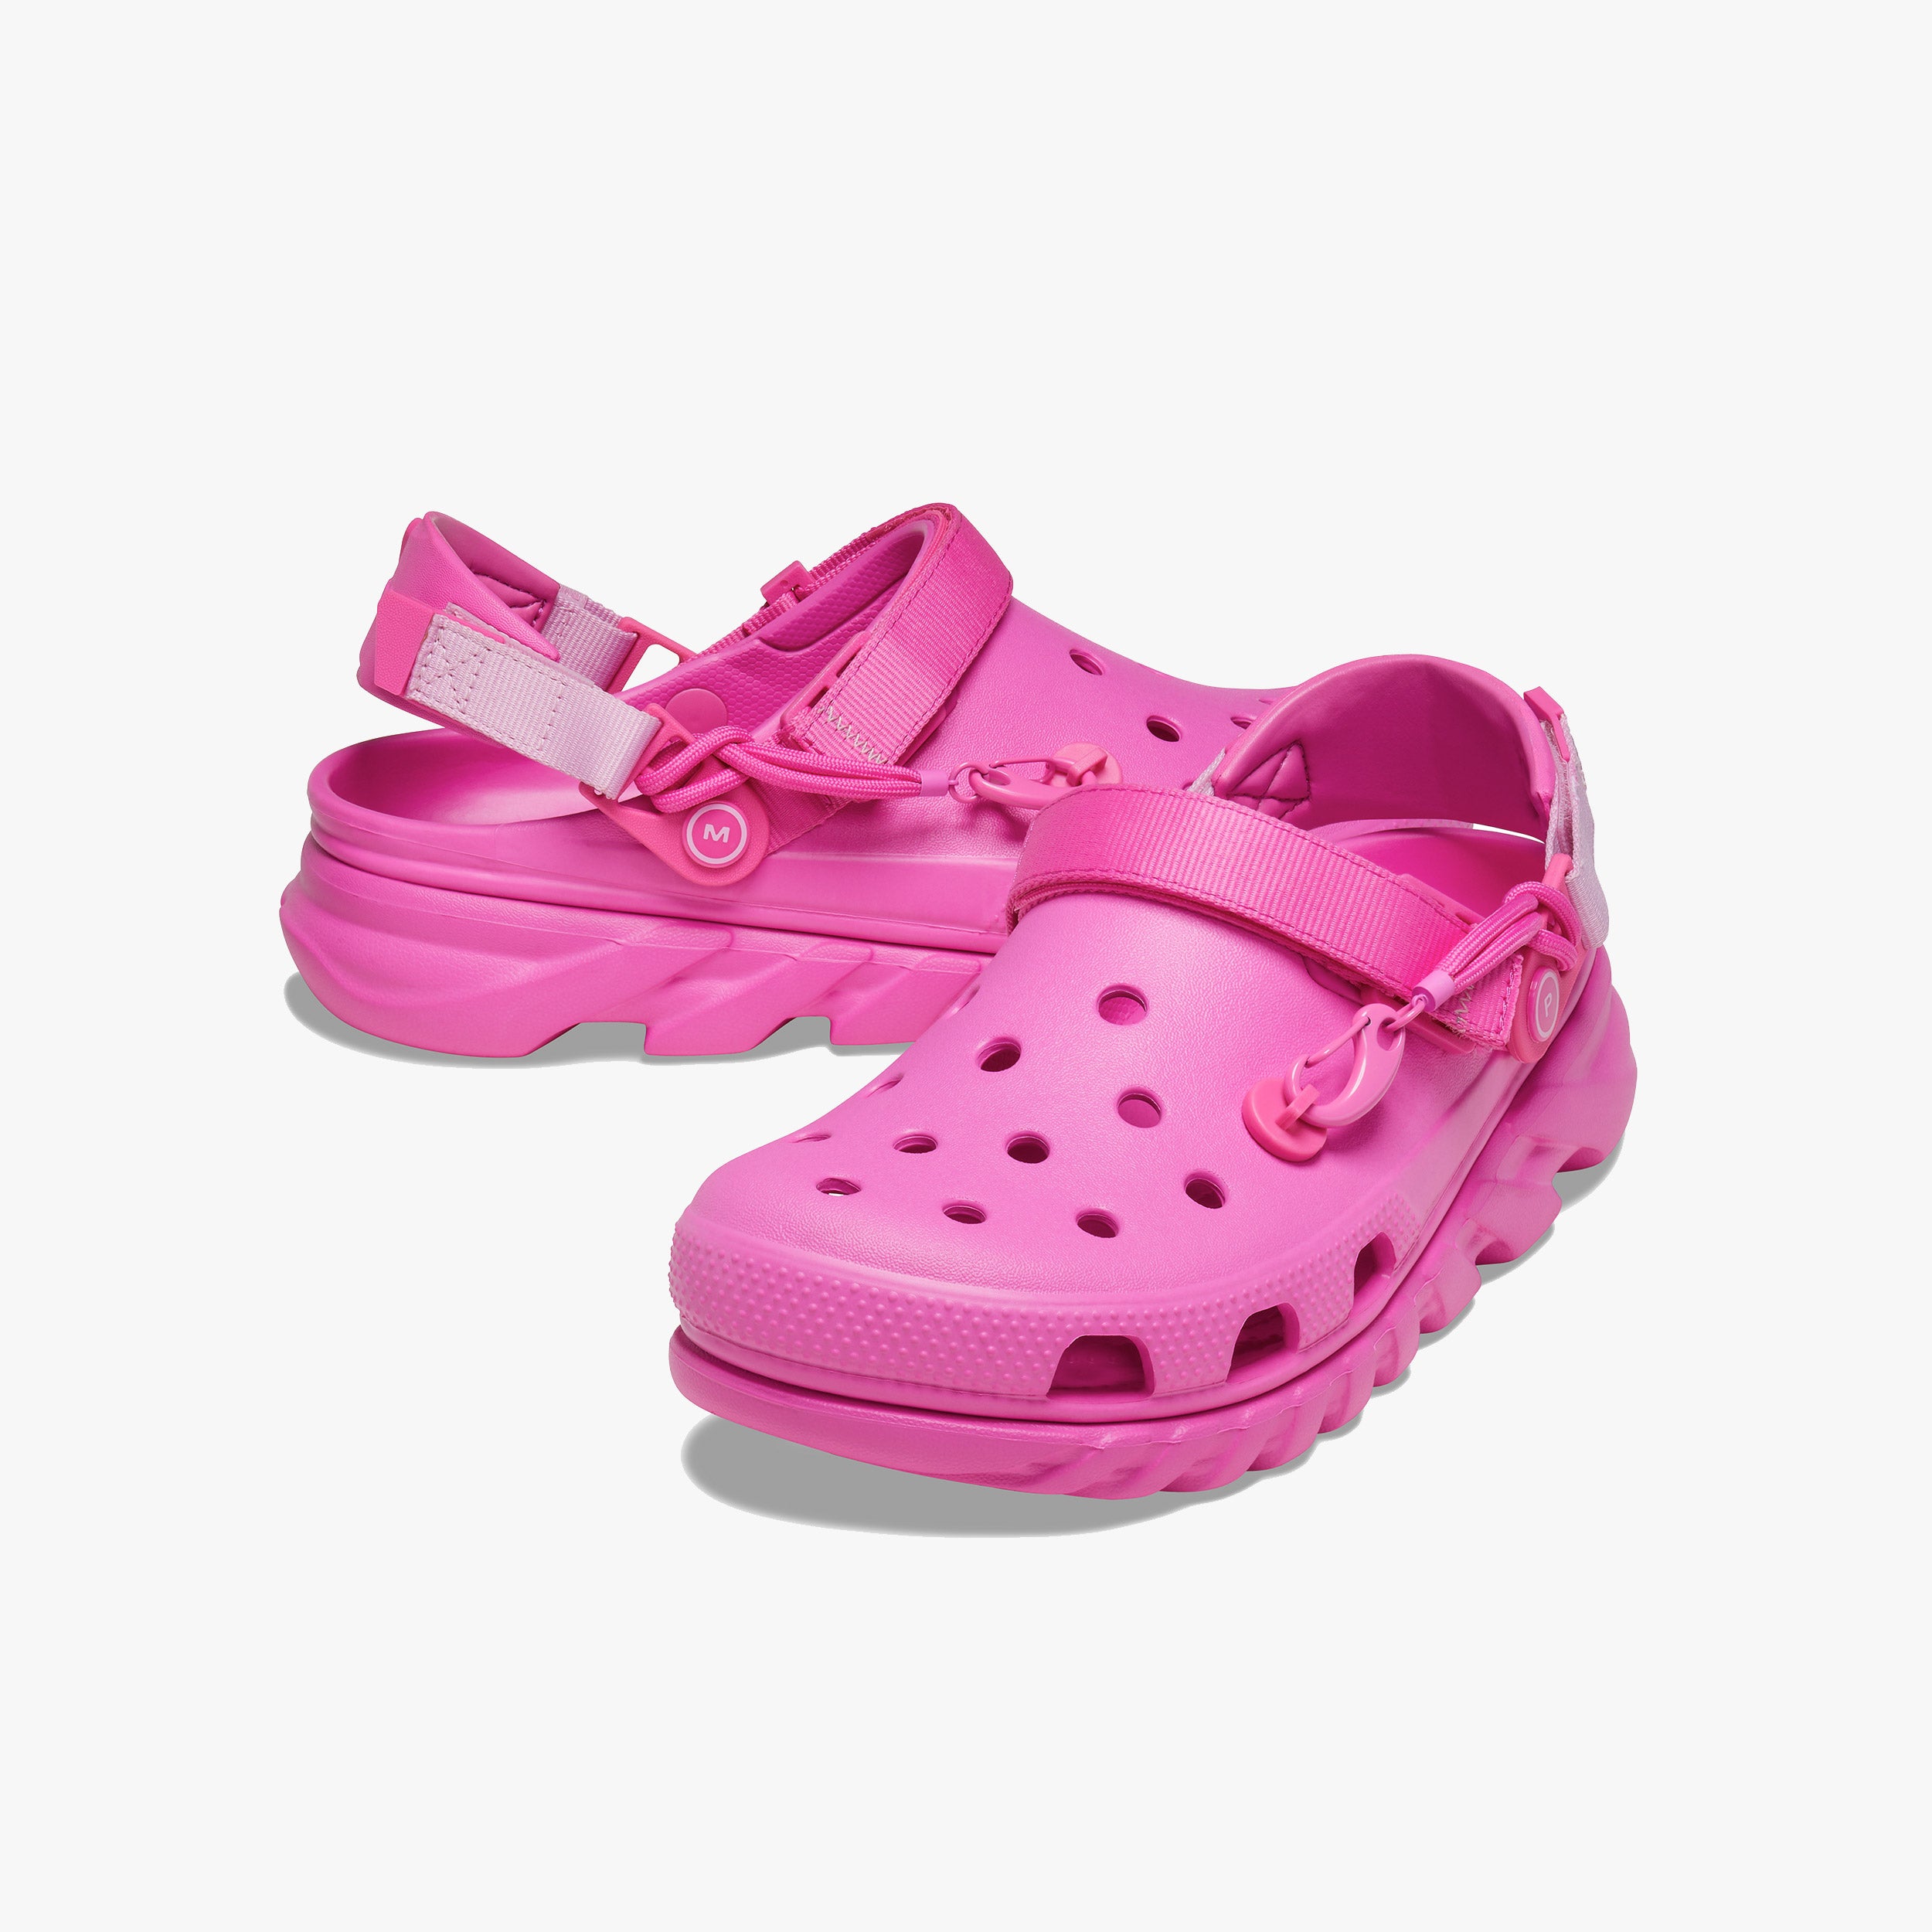 Rare Limited Edition Crocs Duet Max 2 Post Malone Pink